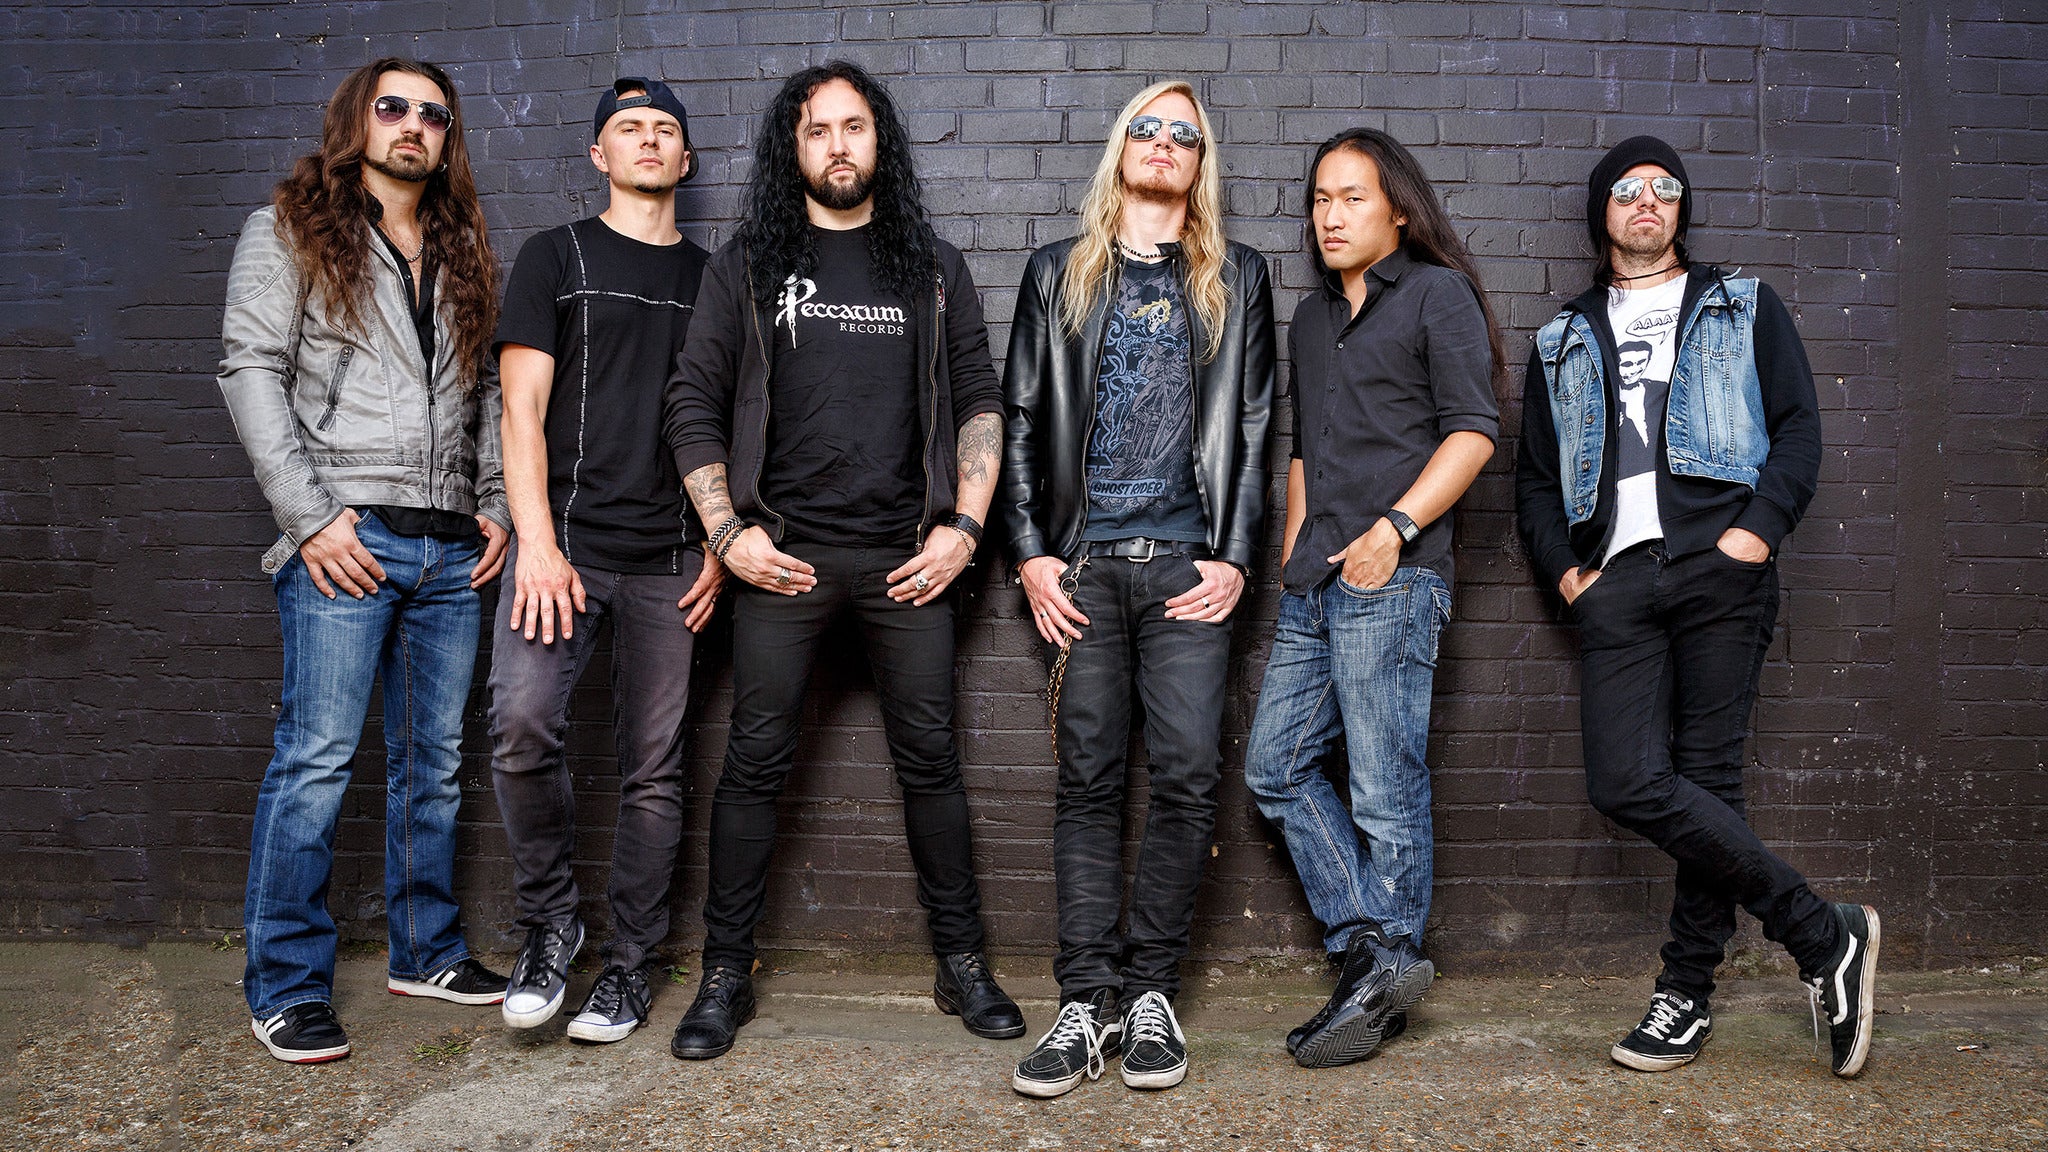 dragonforce troopers of the stars, DRAGONFORCE Release Music Video For ‘Troopers Of The Stars’, Announce Fall 2022 European Tour